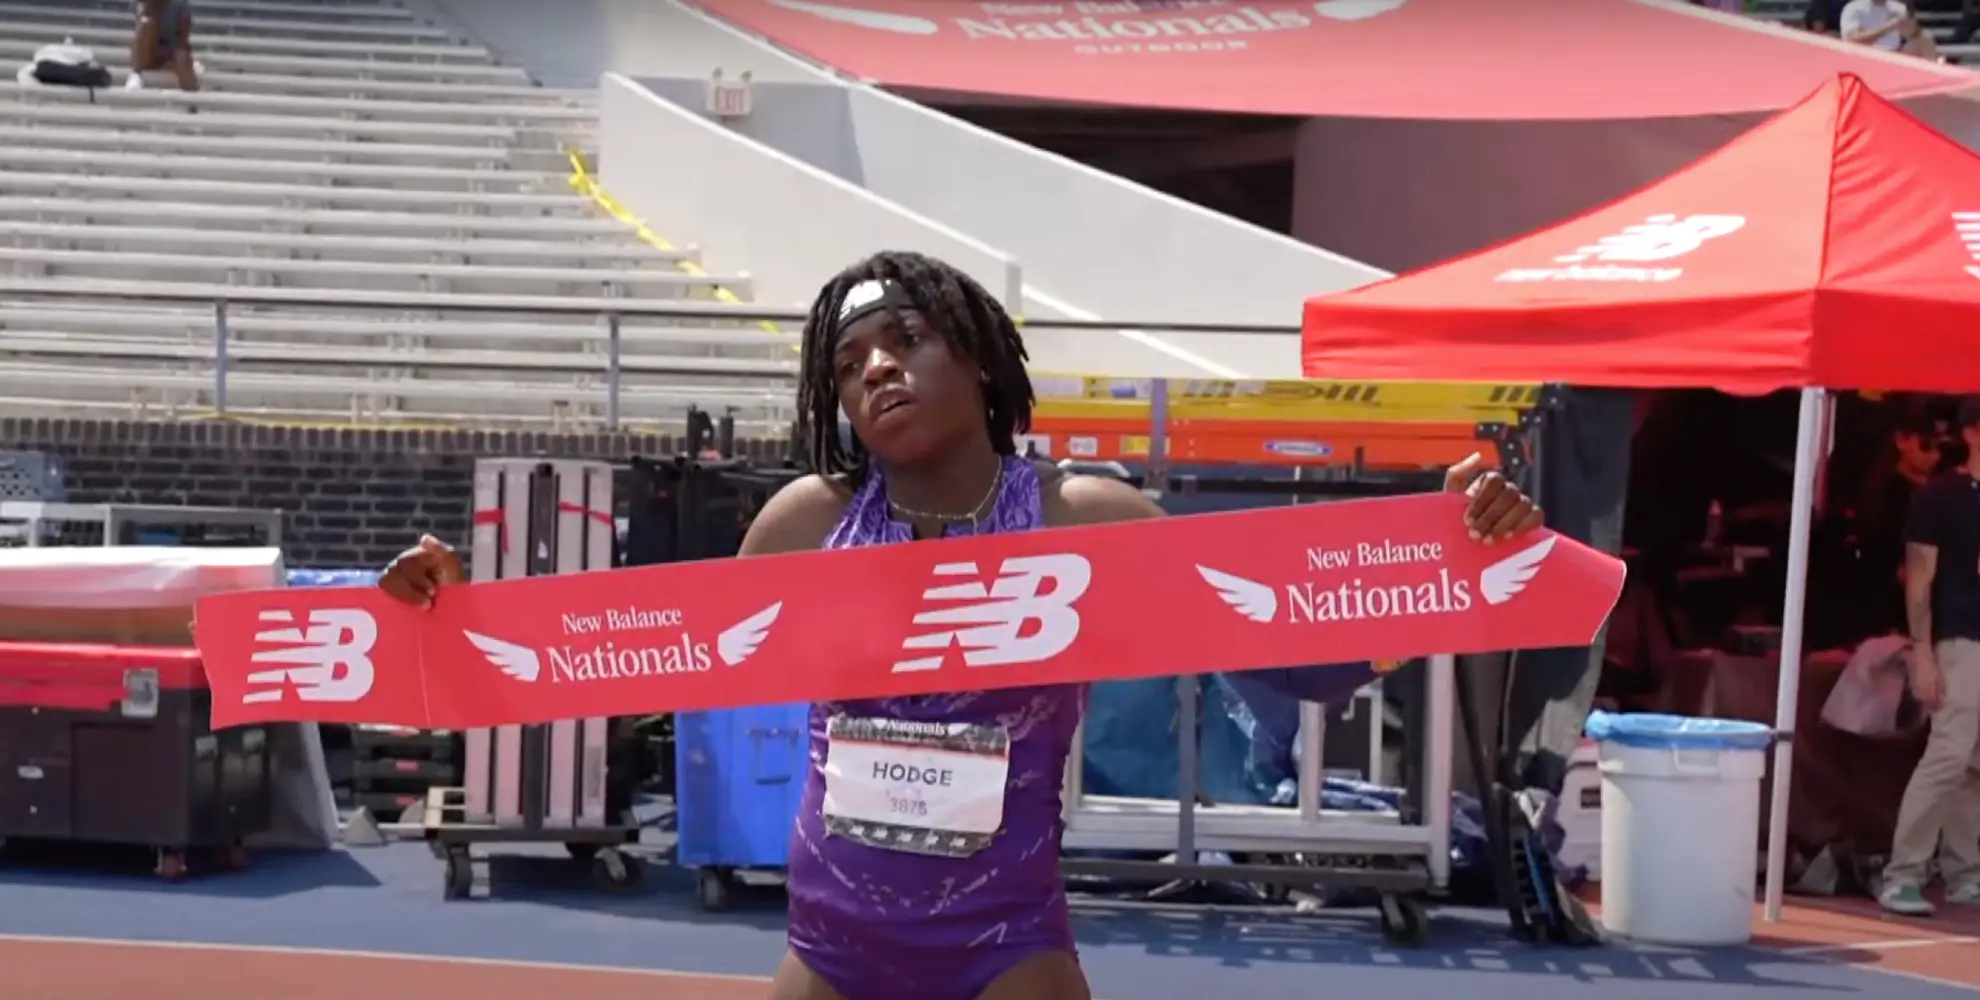 Adaejah Hodge wins 200m title at New Balance Nationals Outdoor